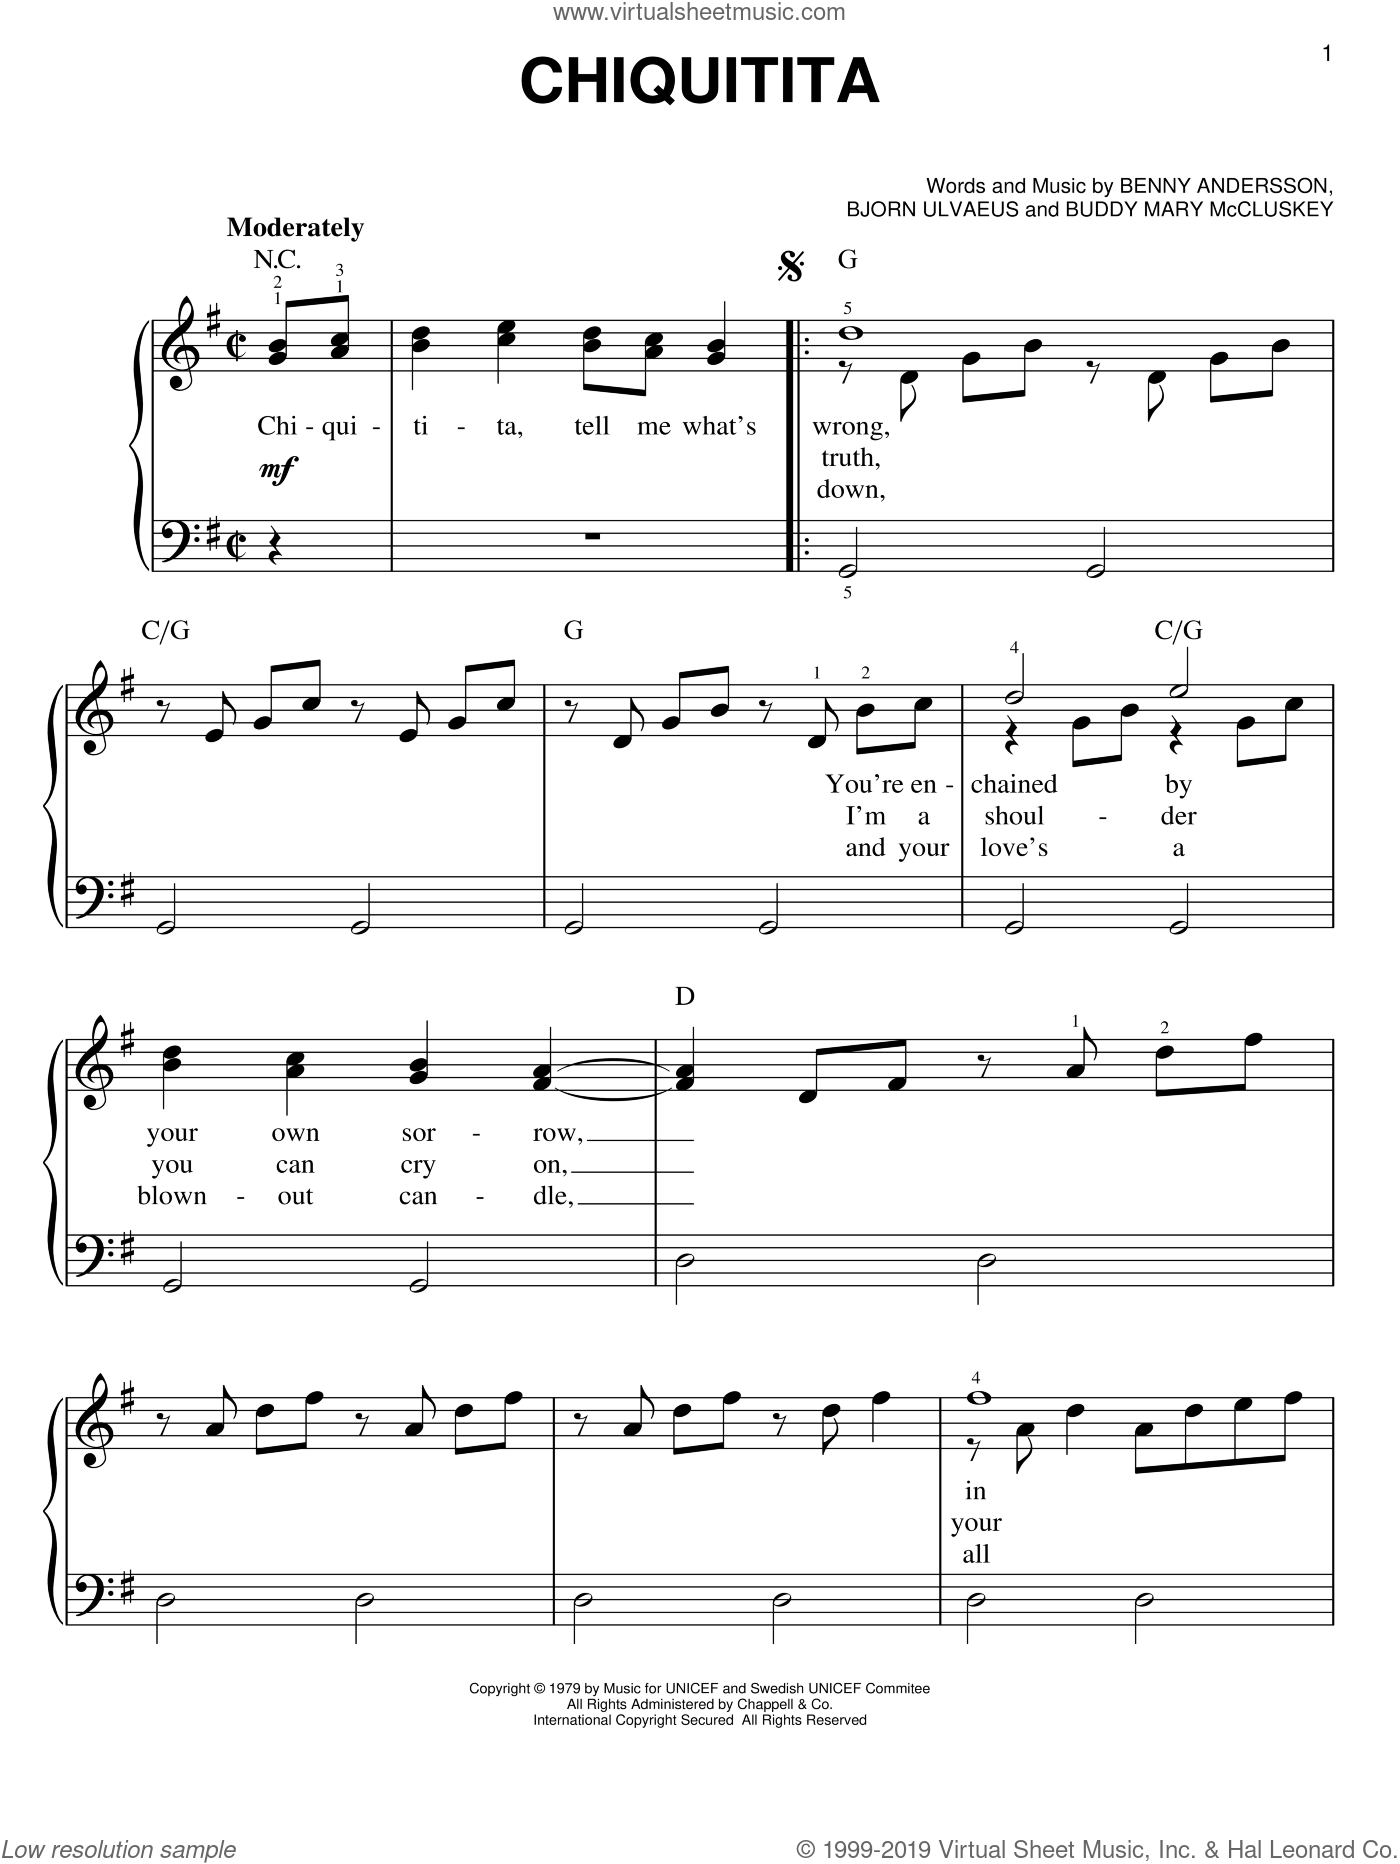 Abba Chiquitita Easy Sheet Music For Piano Solo Pdf Play chiquitita chords using simple video lessons. abba chiquitita easy sheet music for piano solo pdf